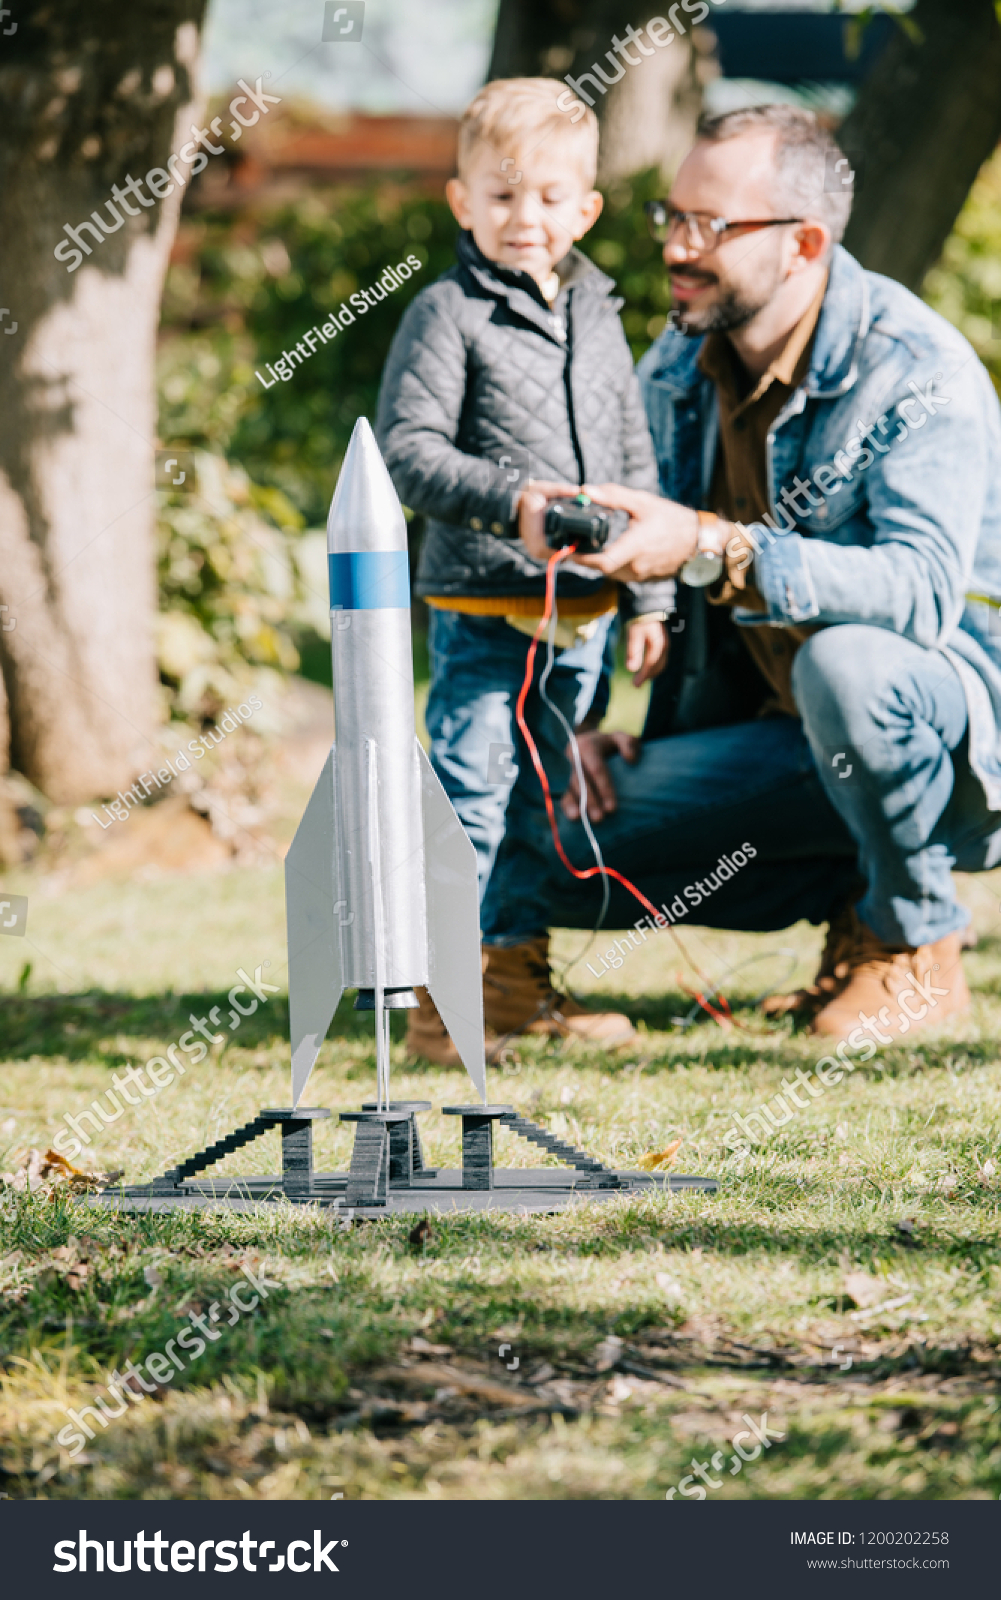 close-up view of model rocket and father with son playing behind #1200202258